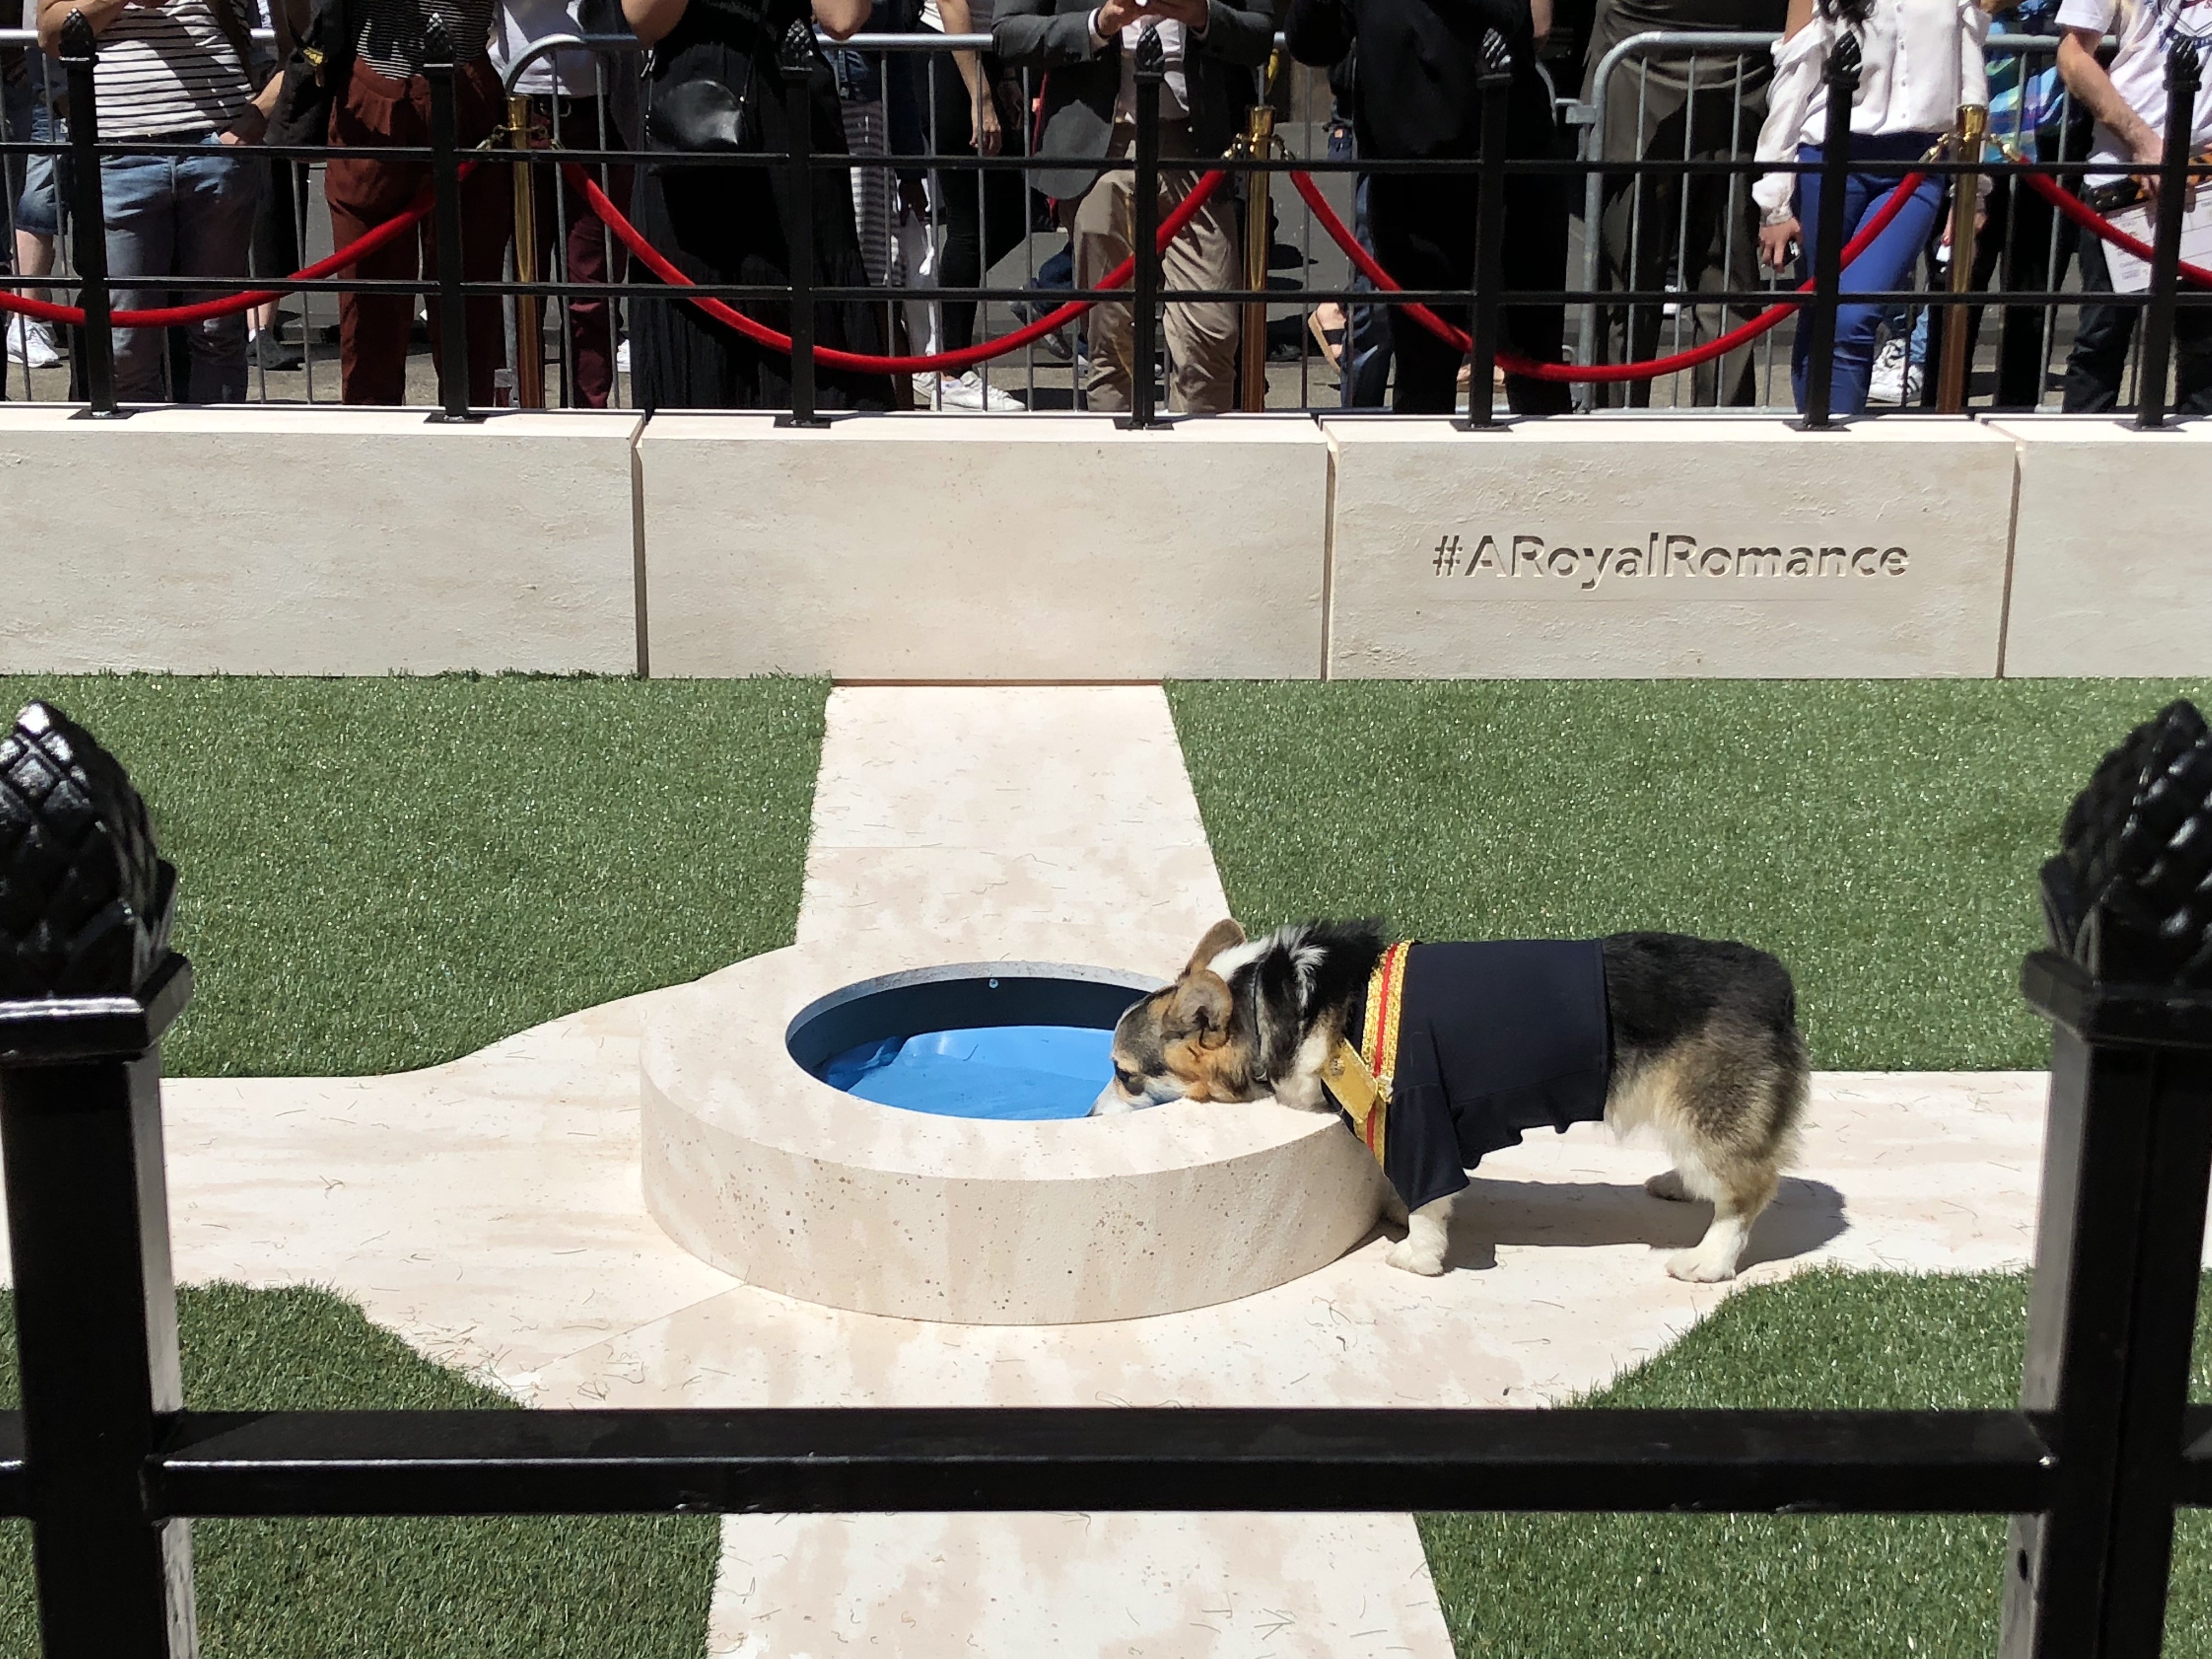 A thirsty Prince Harry laps at water from the fountain. (Raisa Bruner)